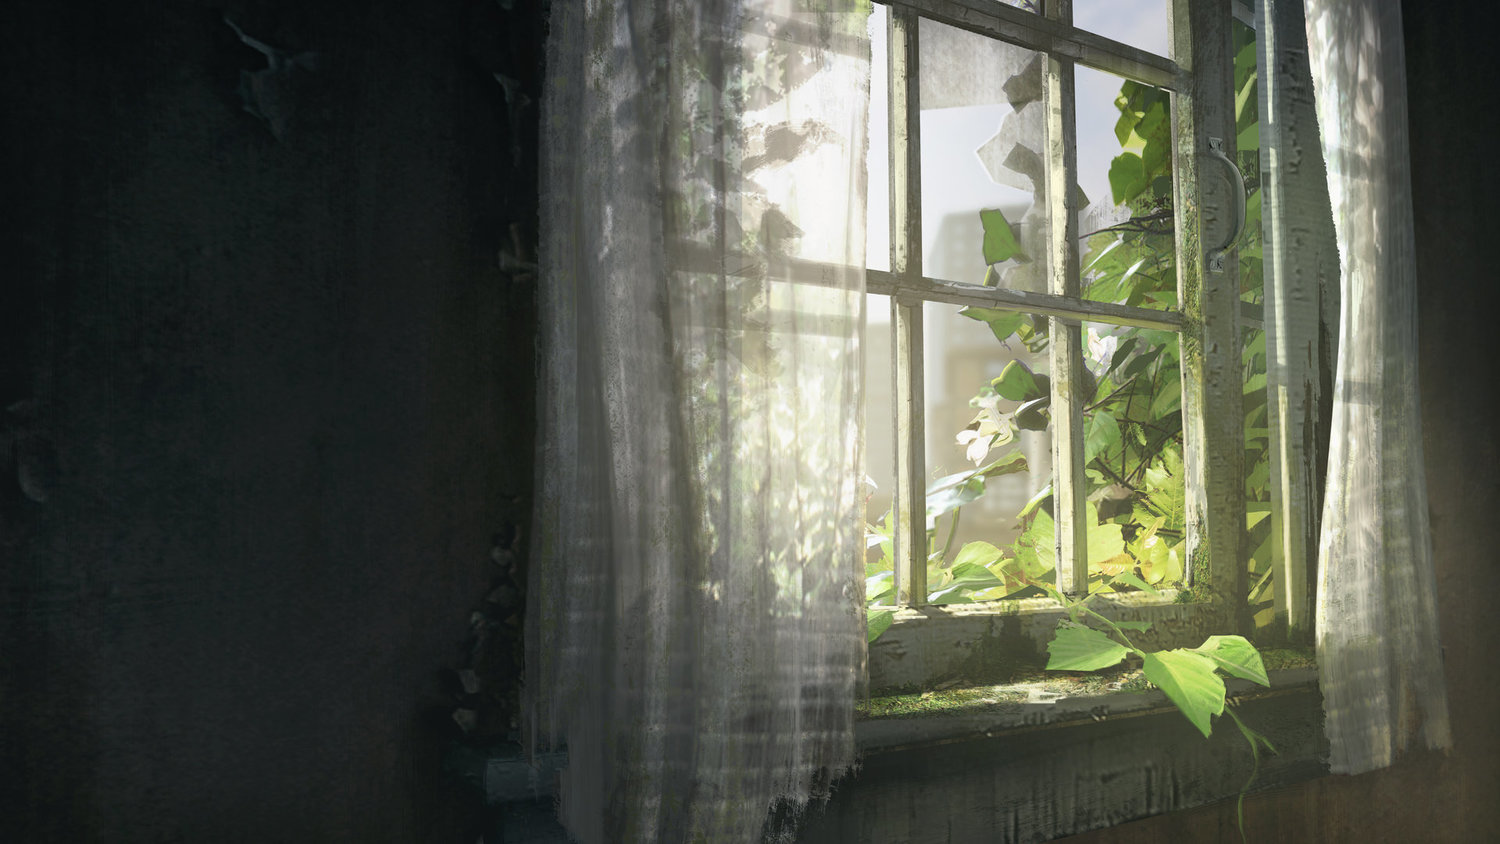 The Last of Us 3's Release Window Already Seems Obvious